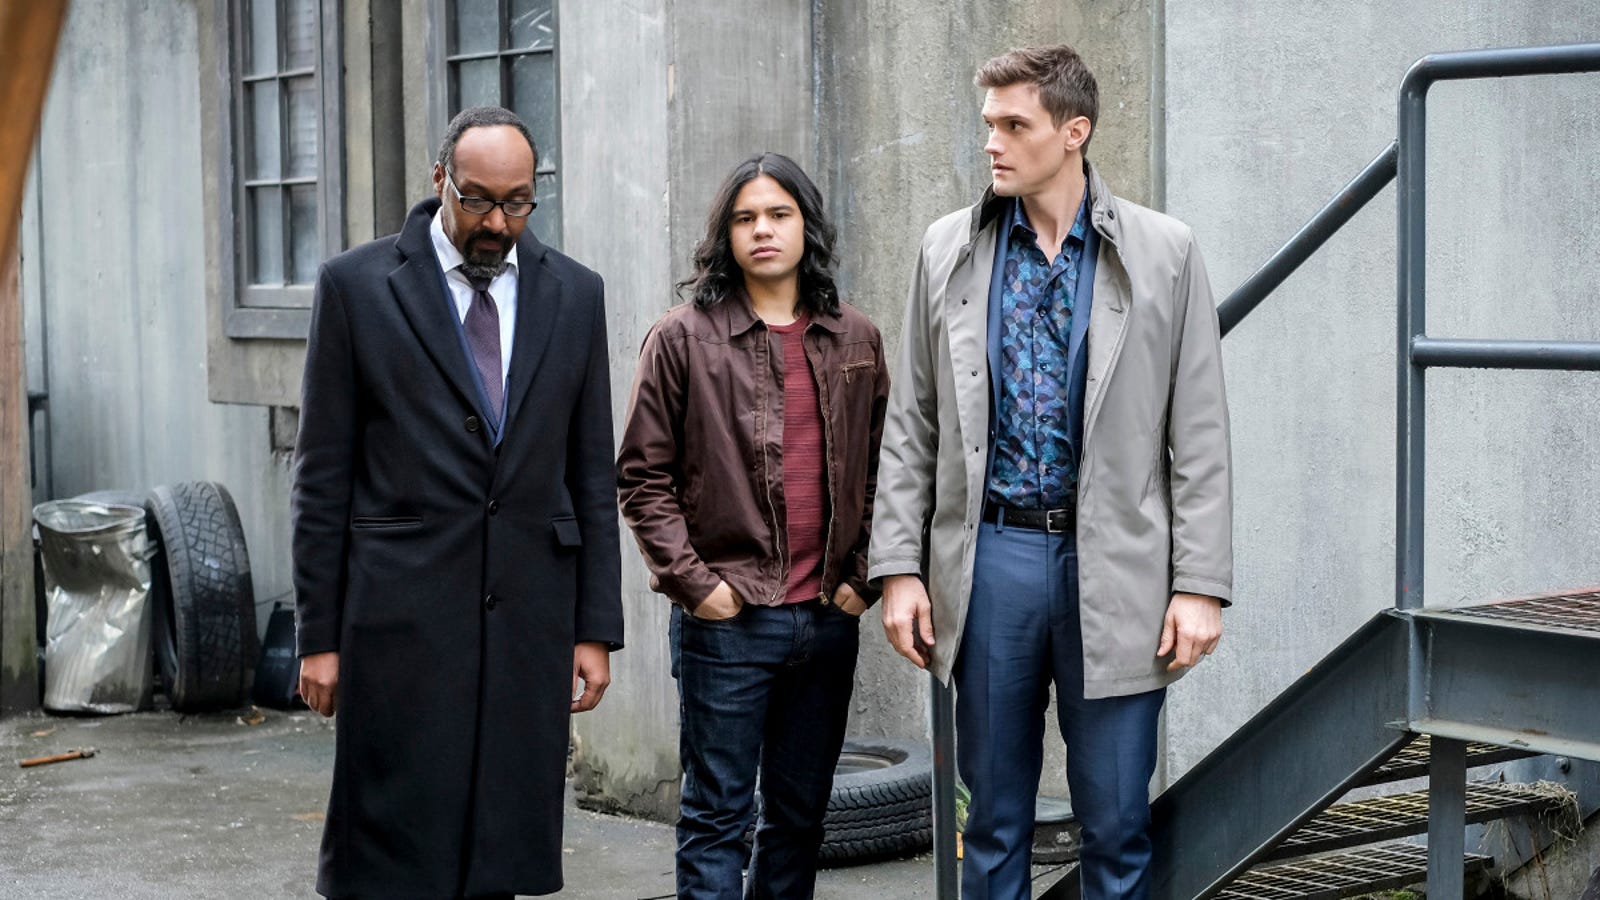 Team Flash gets downsized in the season's funniest episode